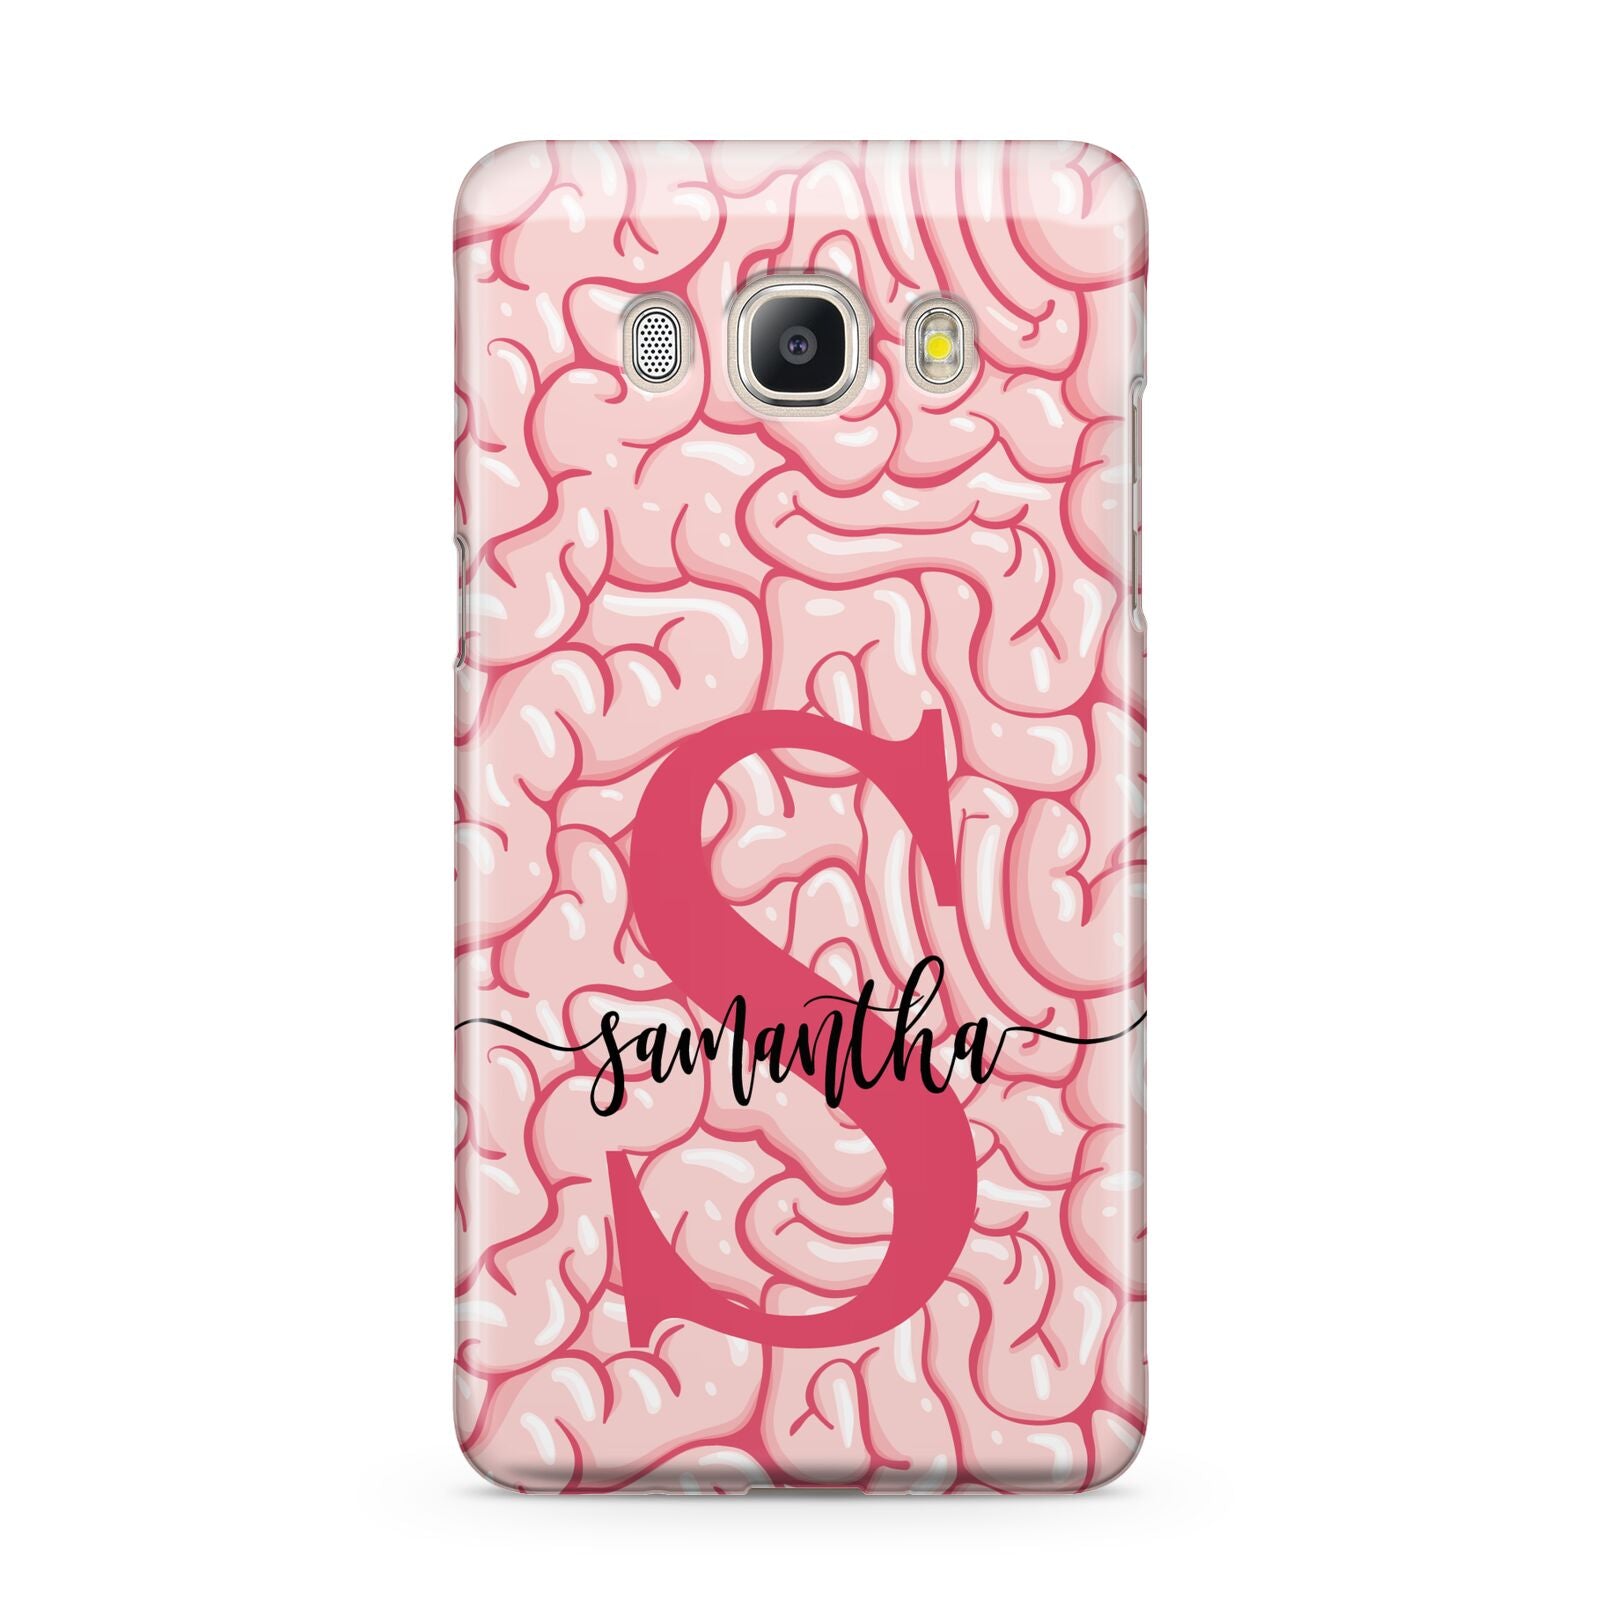 Brain Background with Monogram and Text Samsung Galaxy J5 2016 Case